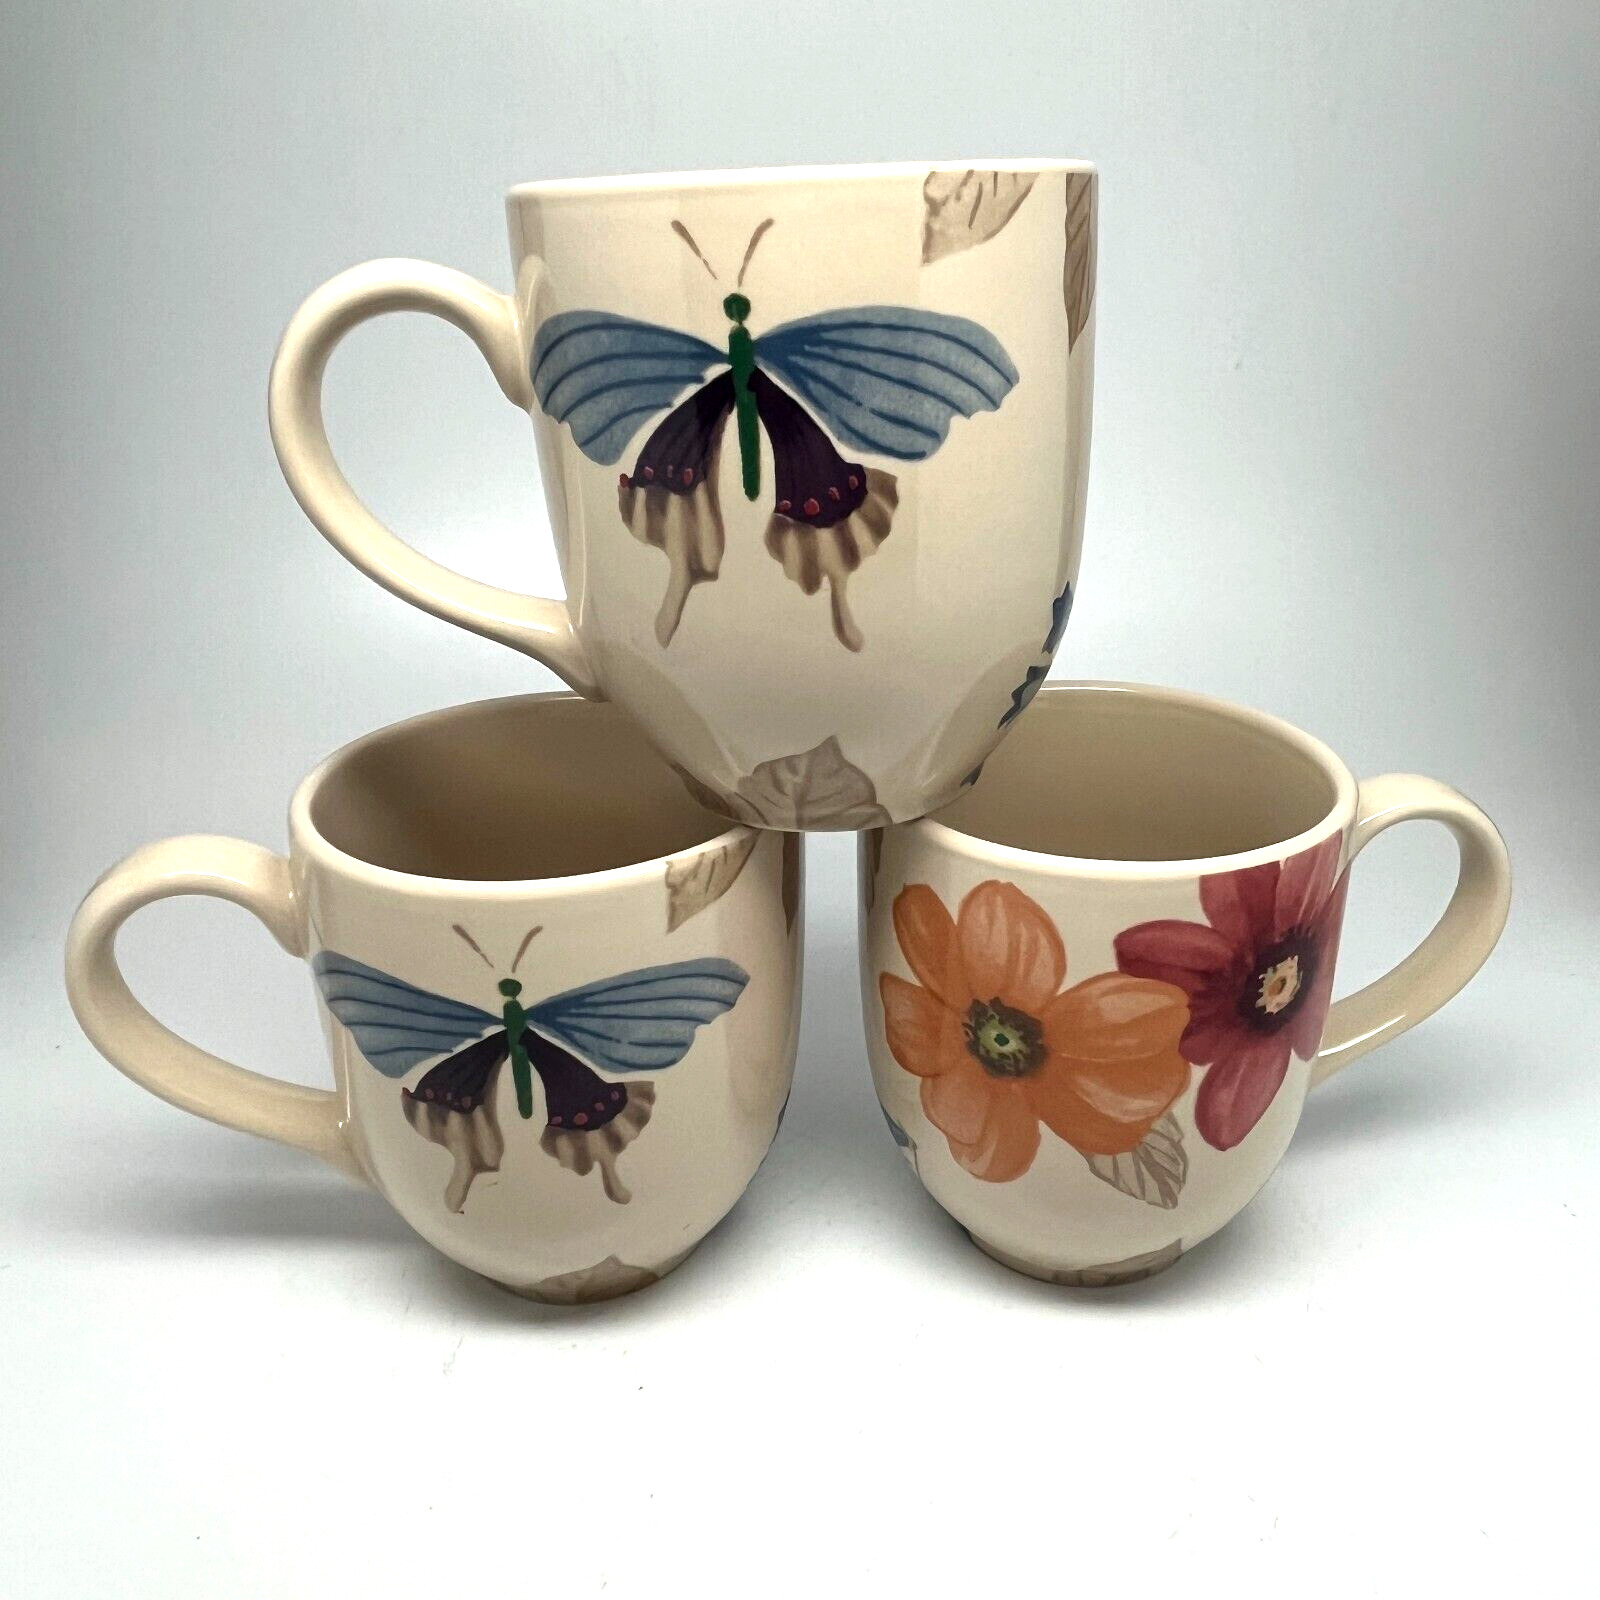 Longaberger Botanical Fields Flower &Butterfly Mugs Set Of 3 Excellent Condition